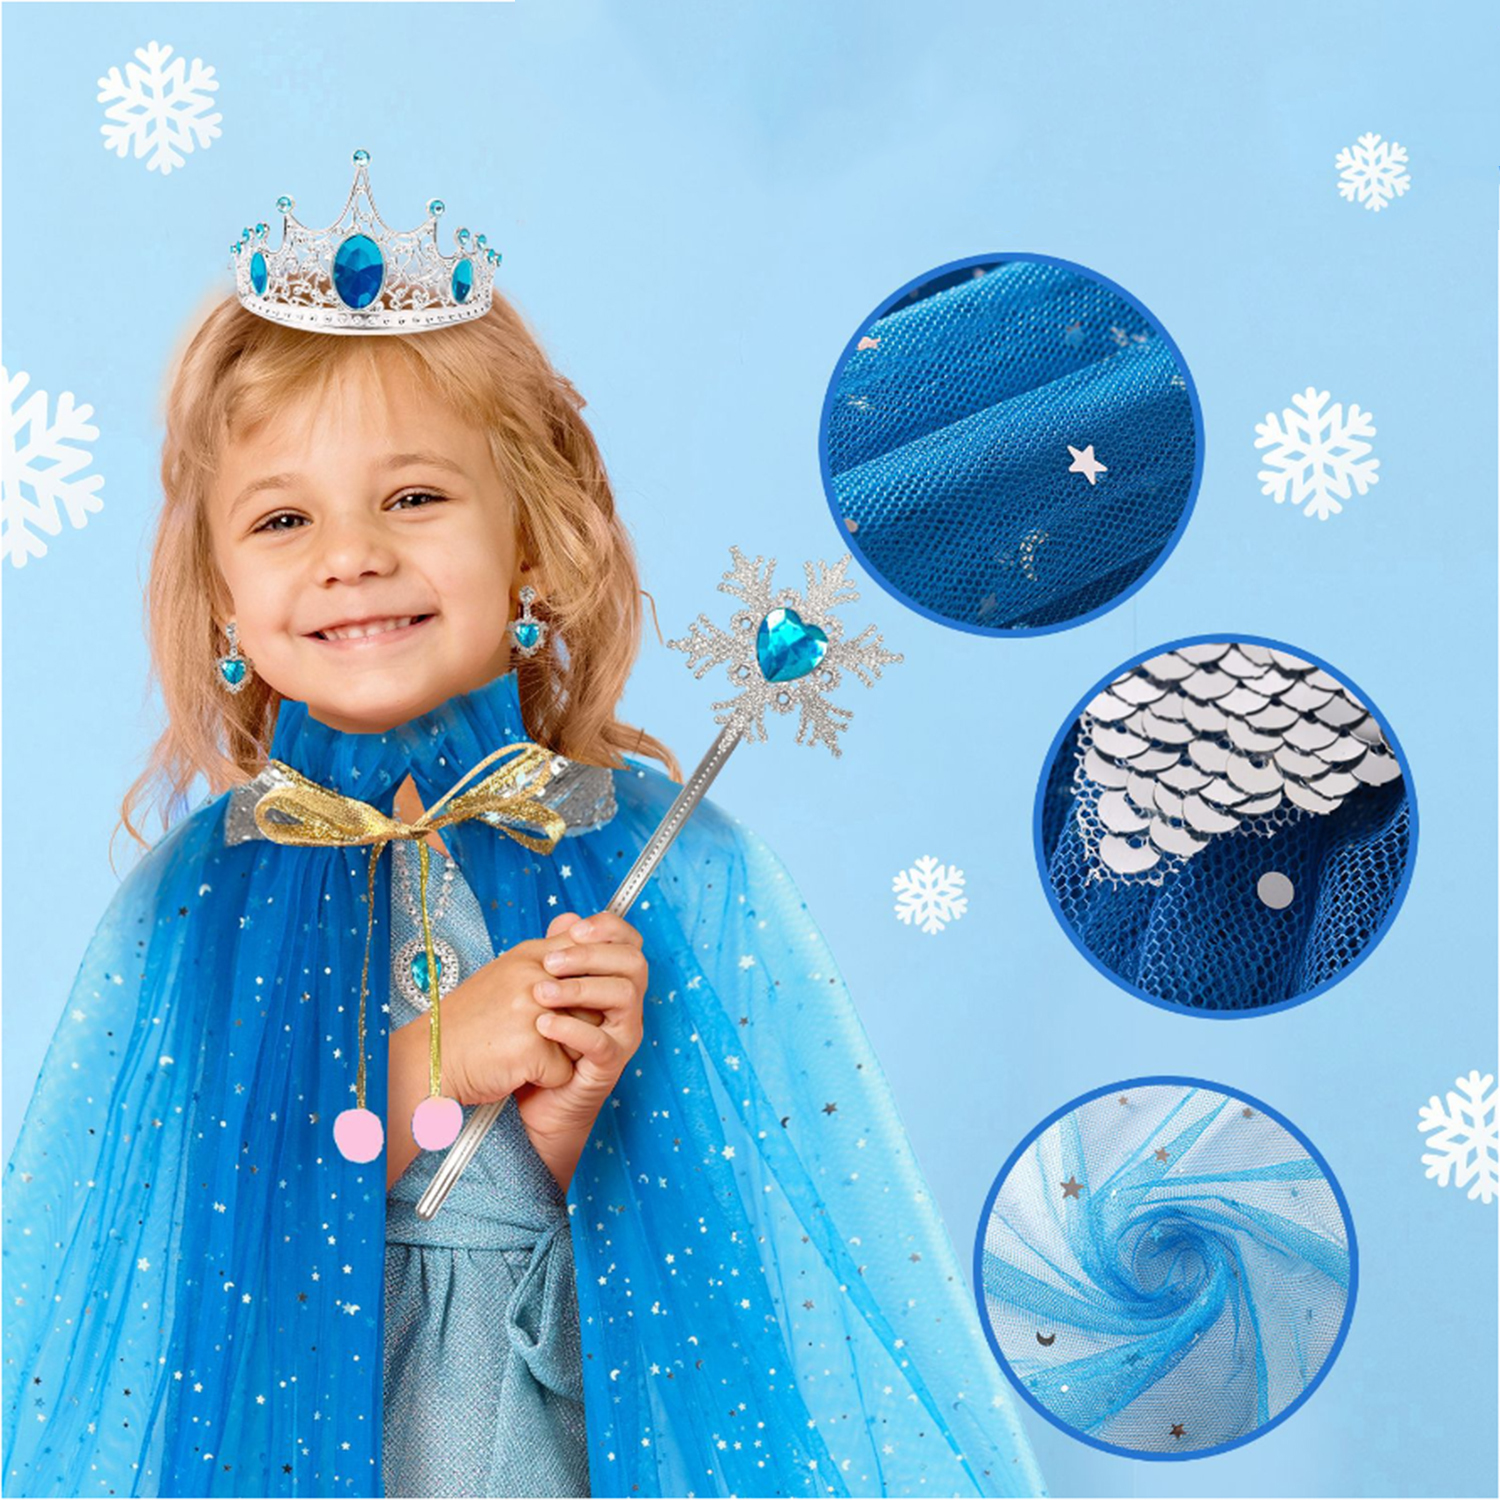 AOXTOY Dress-up Cosplay Toys for Girls, Princess Dress Up Clothes Cape Skirt Set, Pretend Play Princess Dress Cloak Jewelry Crown Wand - image 3 of 5